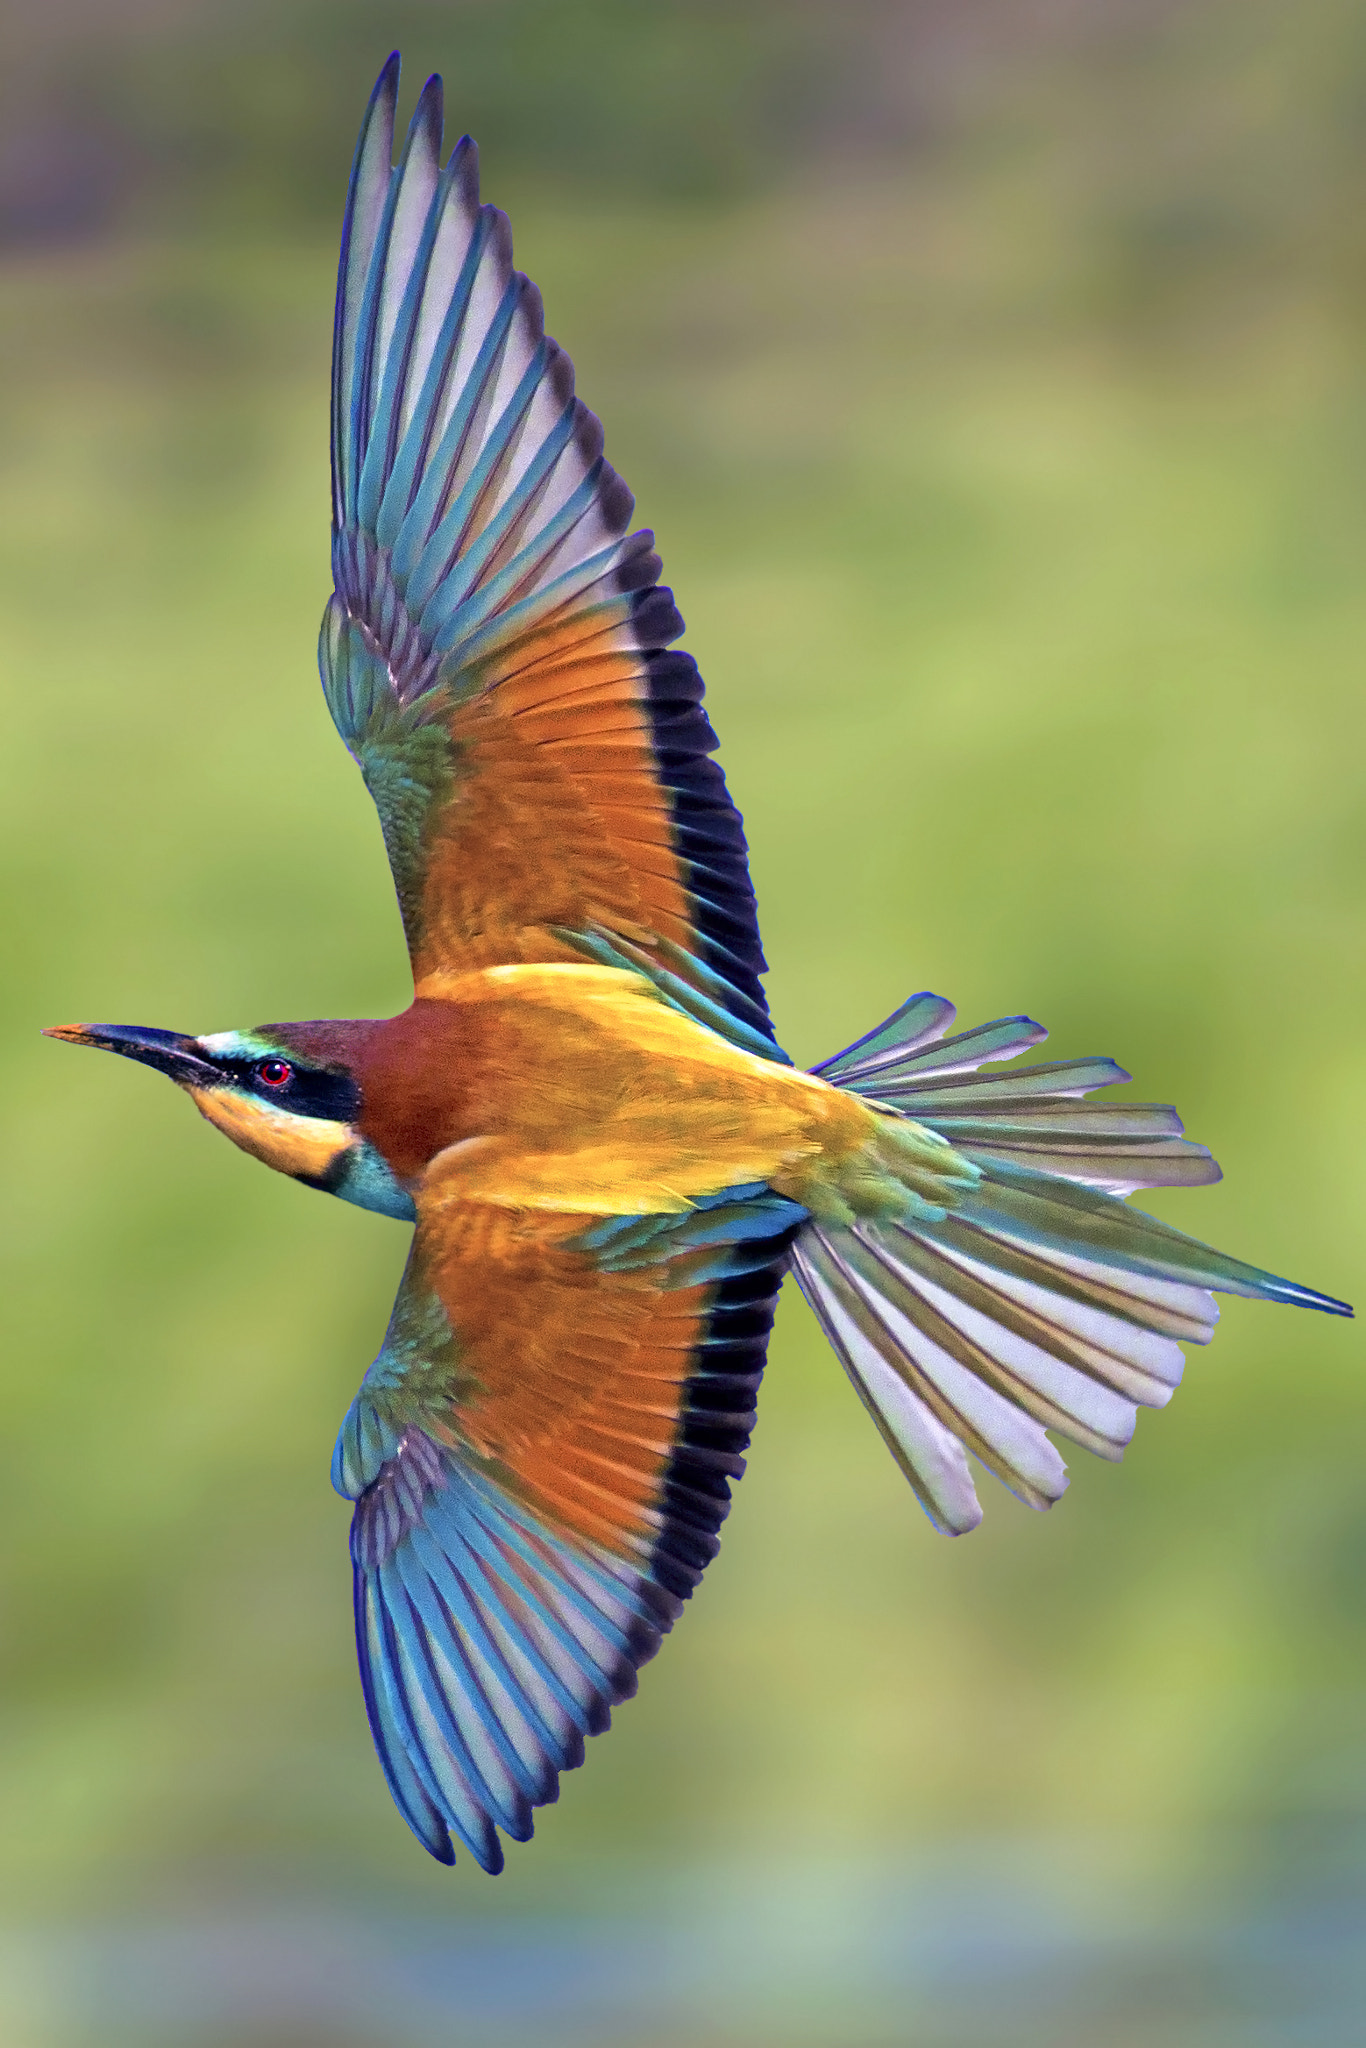 EF300mm f/2.8L USM +2.0x sample photo. Bee eater photography